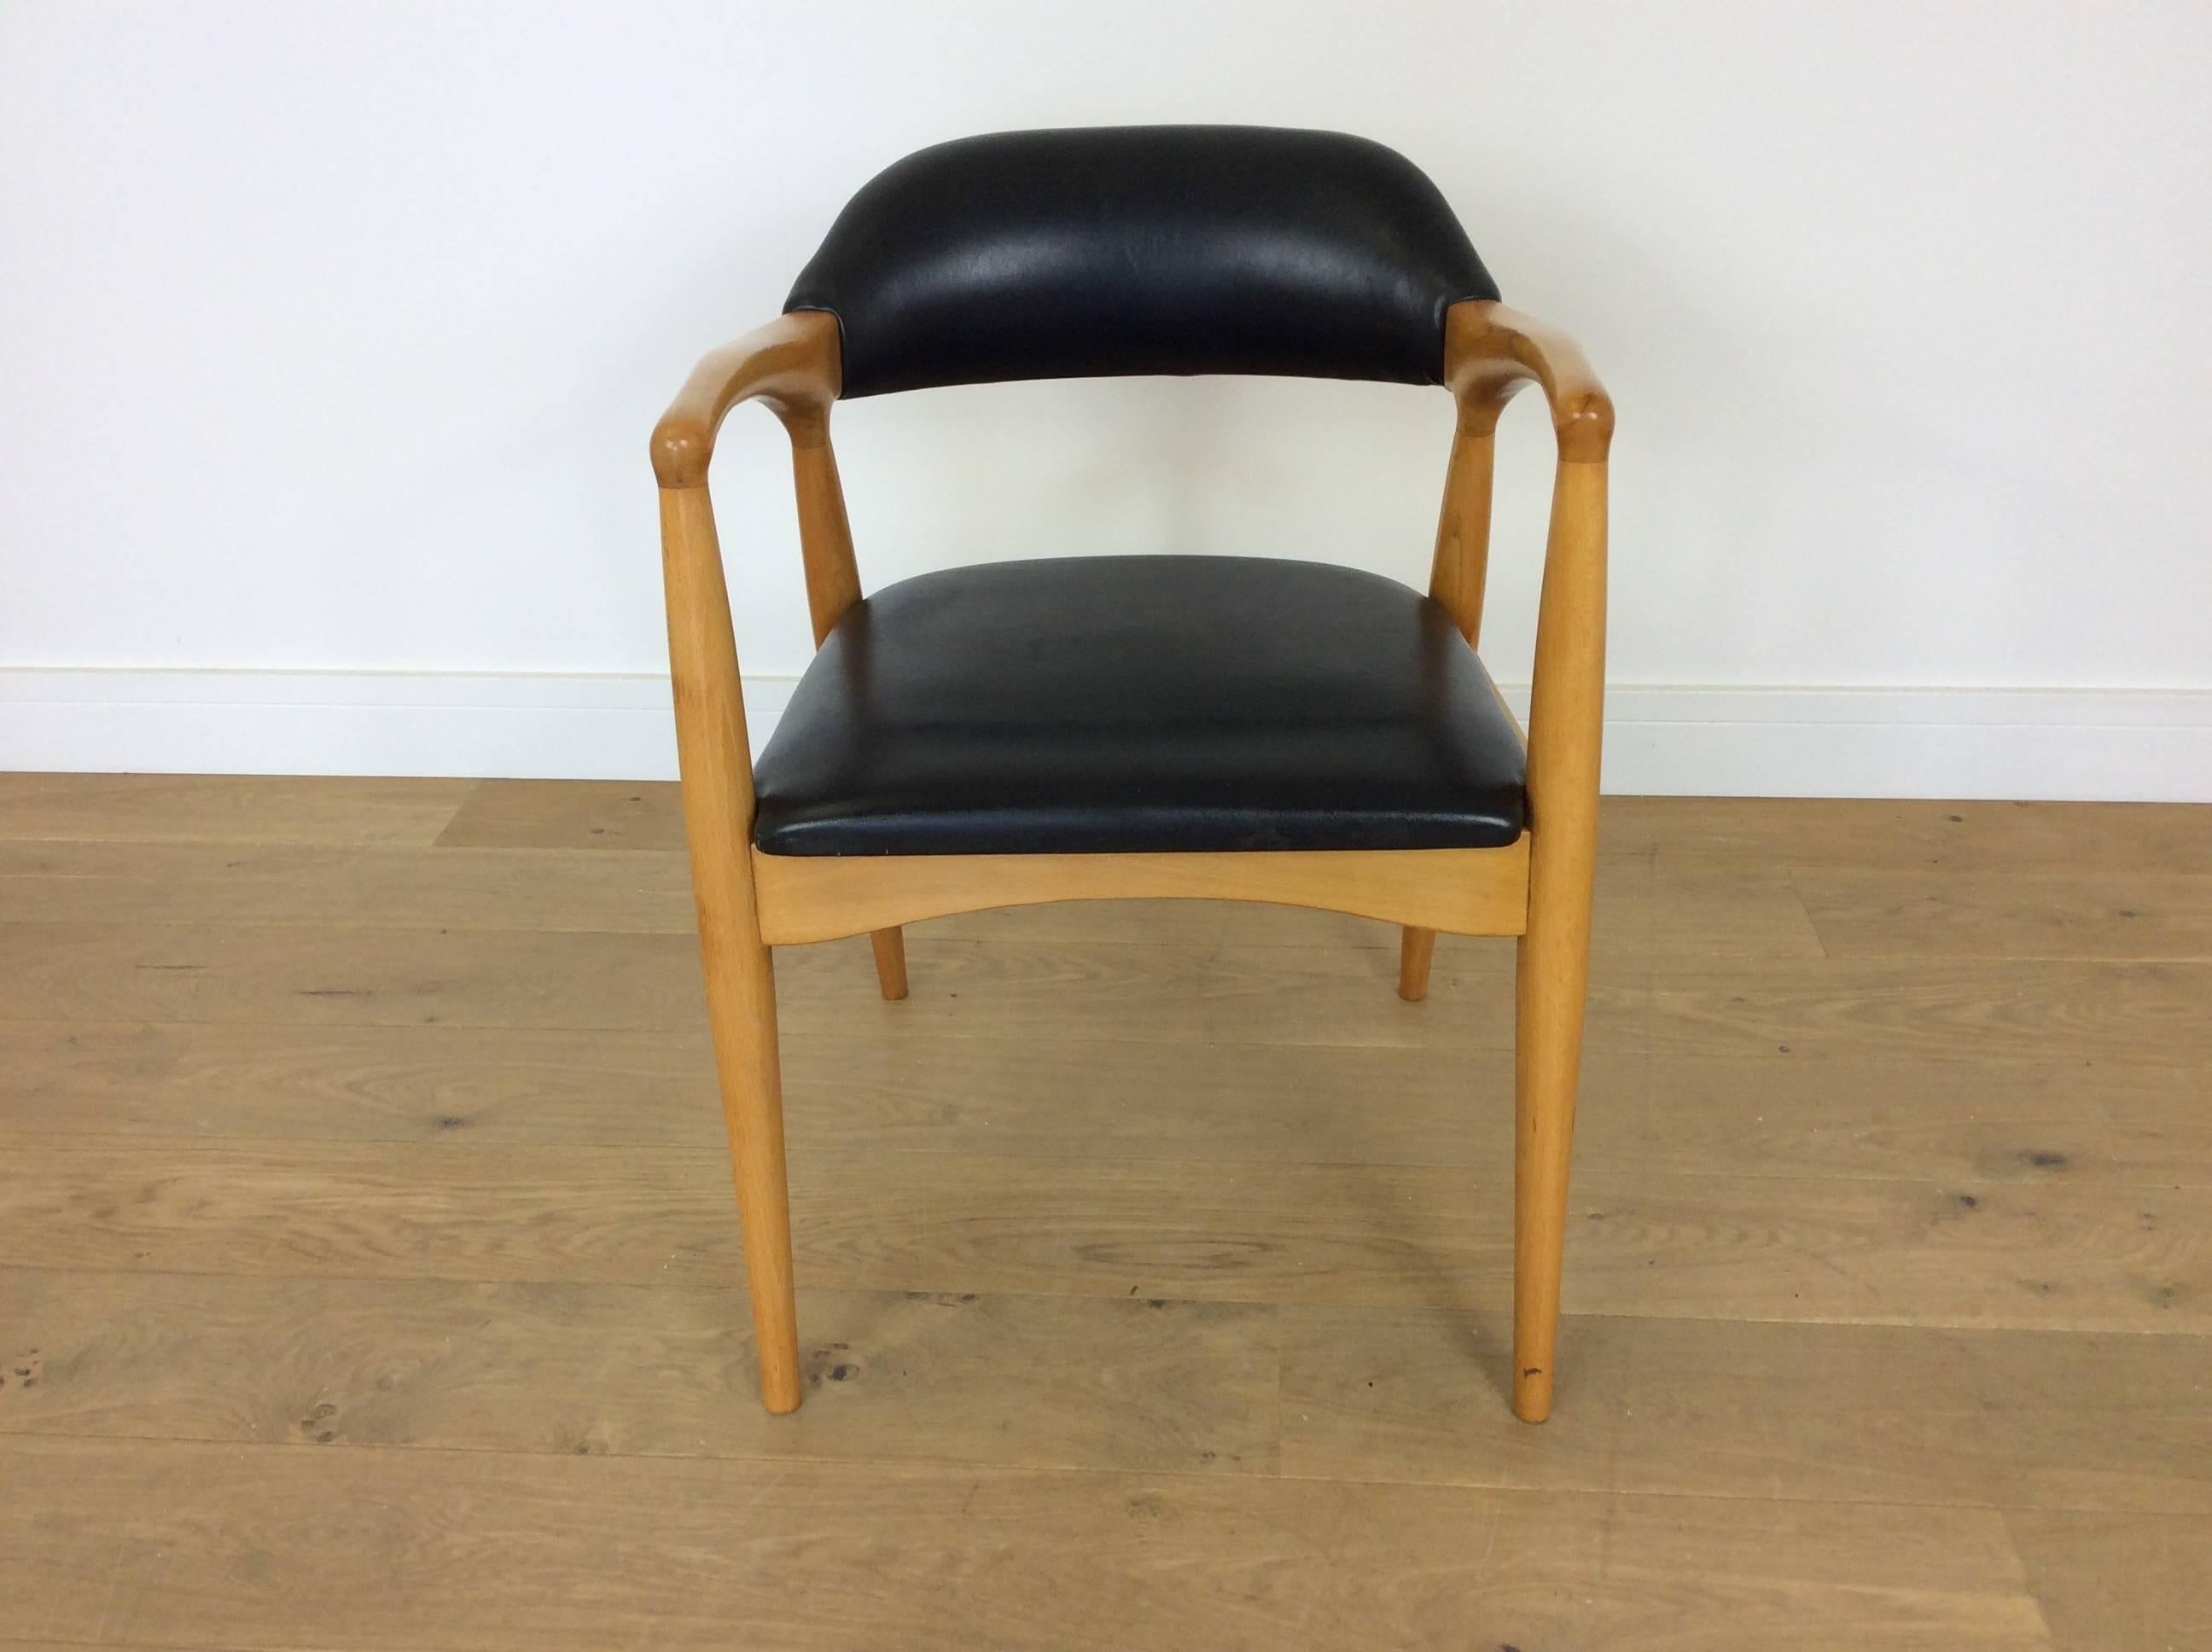 Midcentury design chair in beechwood and black vinyl
Awesome and rare example from Ben chairs of Stowe.
British, circa 1966
Measures: 73 cm H, 55 cm W, 54 cm D, seat H 46 cm, seat D 46 cm.